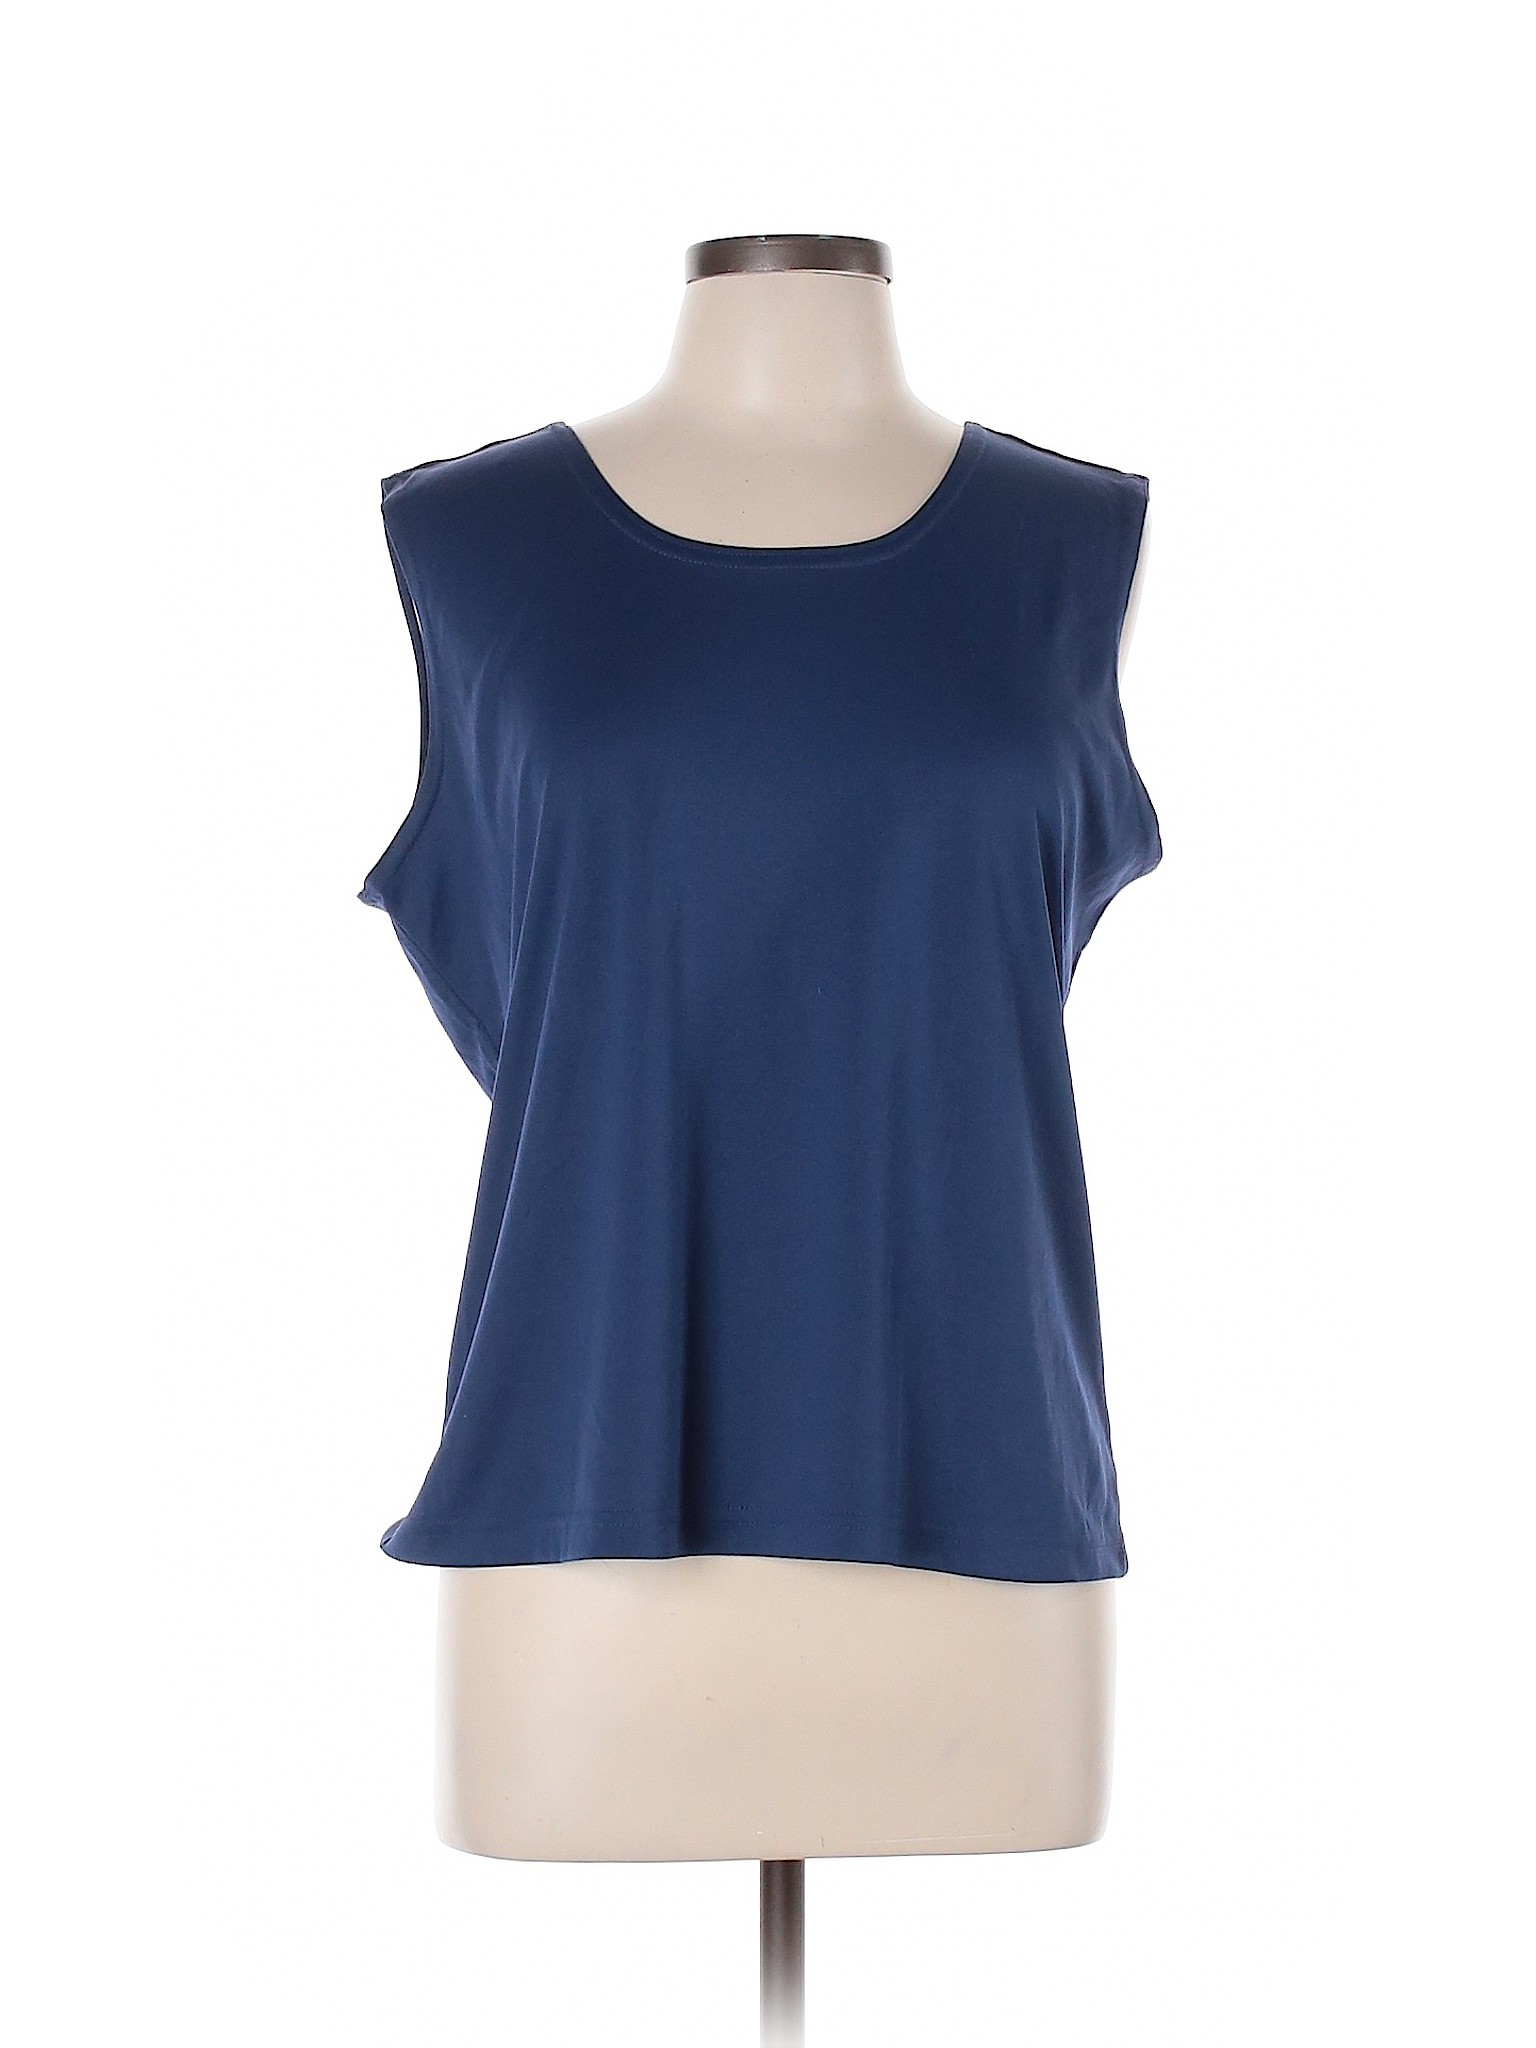 Haband! 100% Polyester Solid Blue Sleeveless Top Size L - 58% off | thredUP